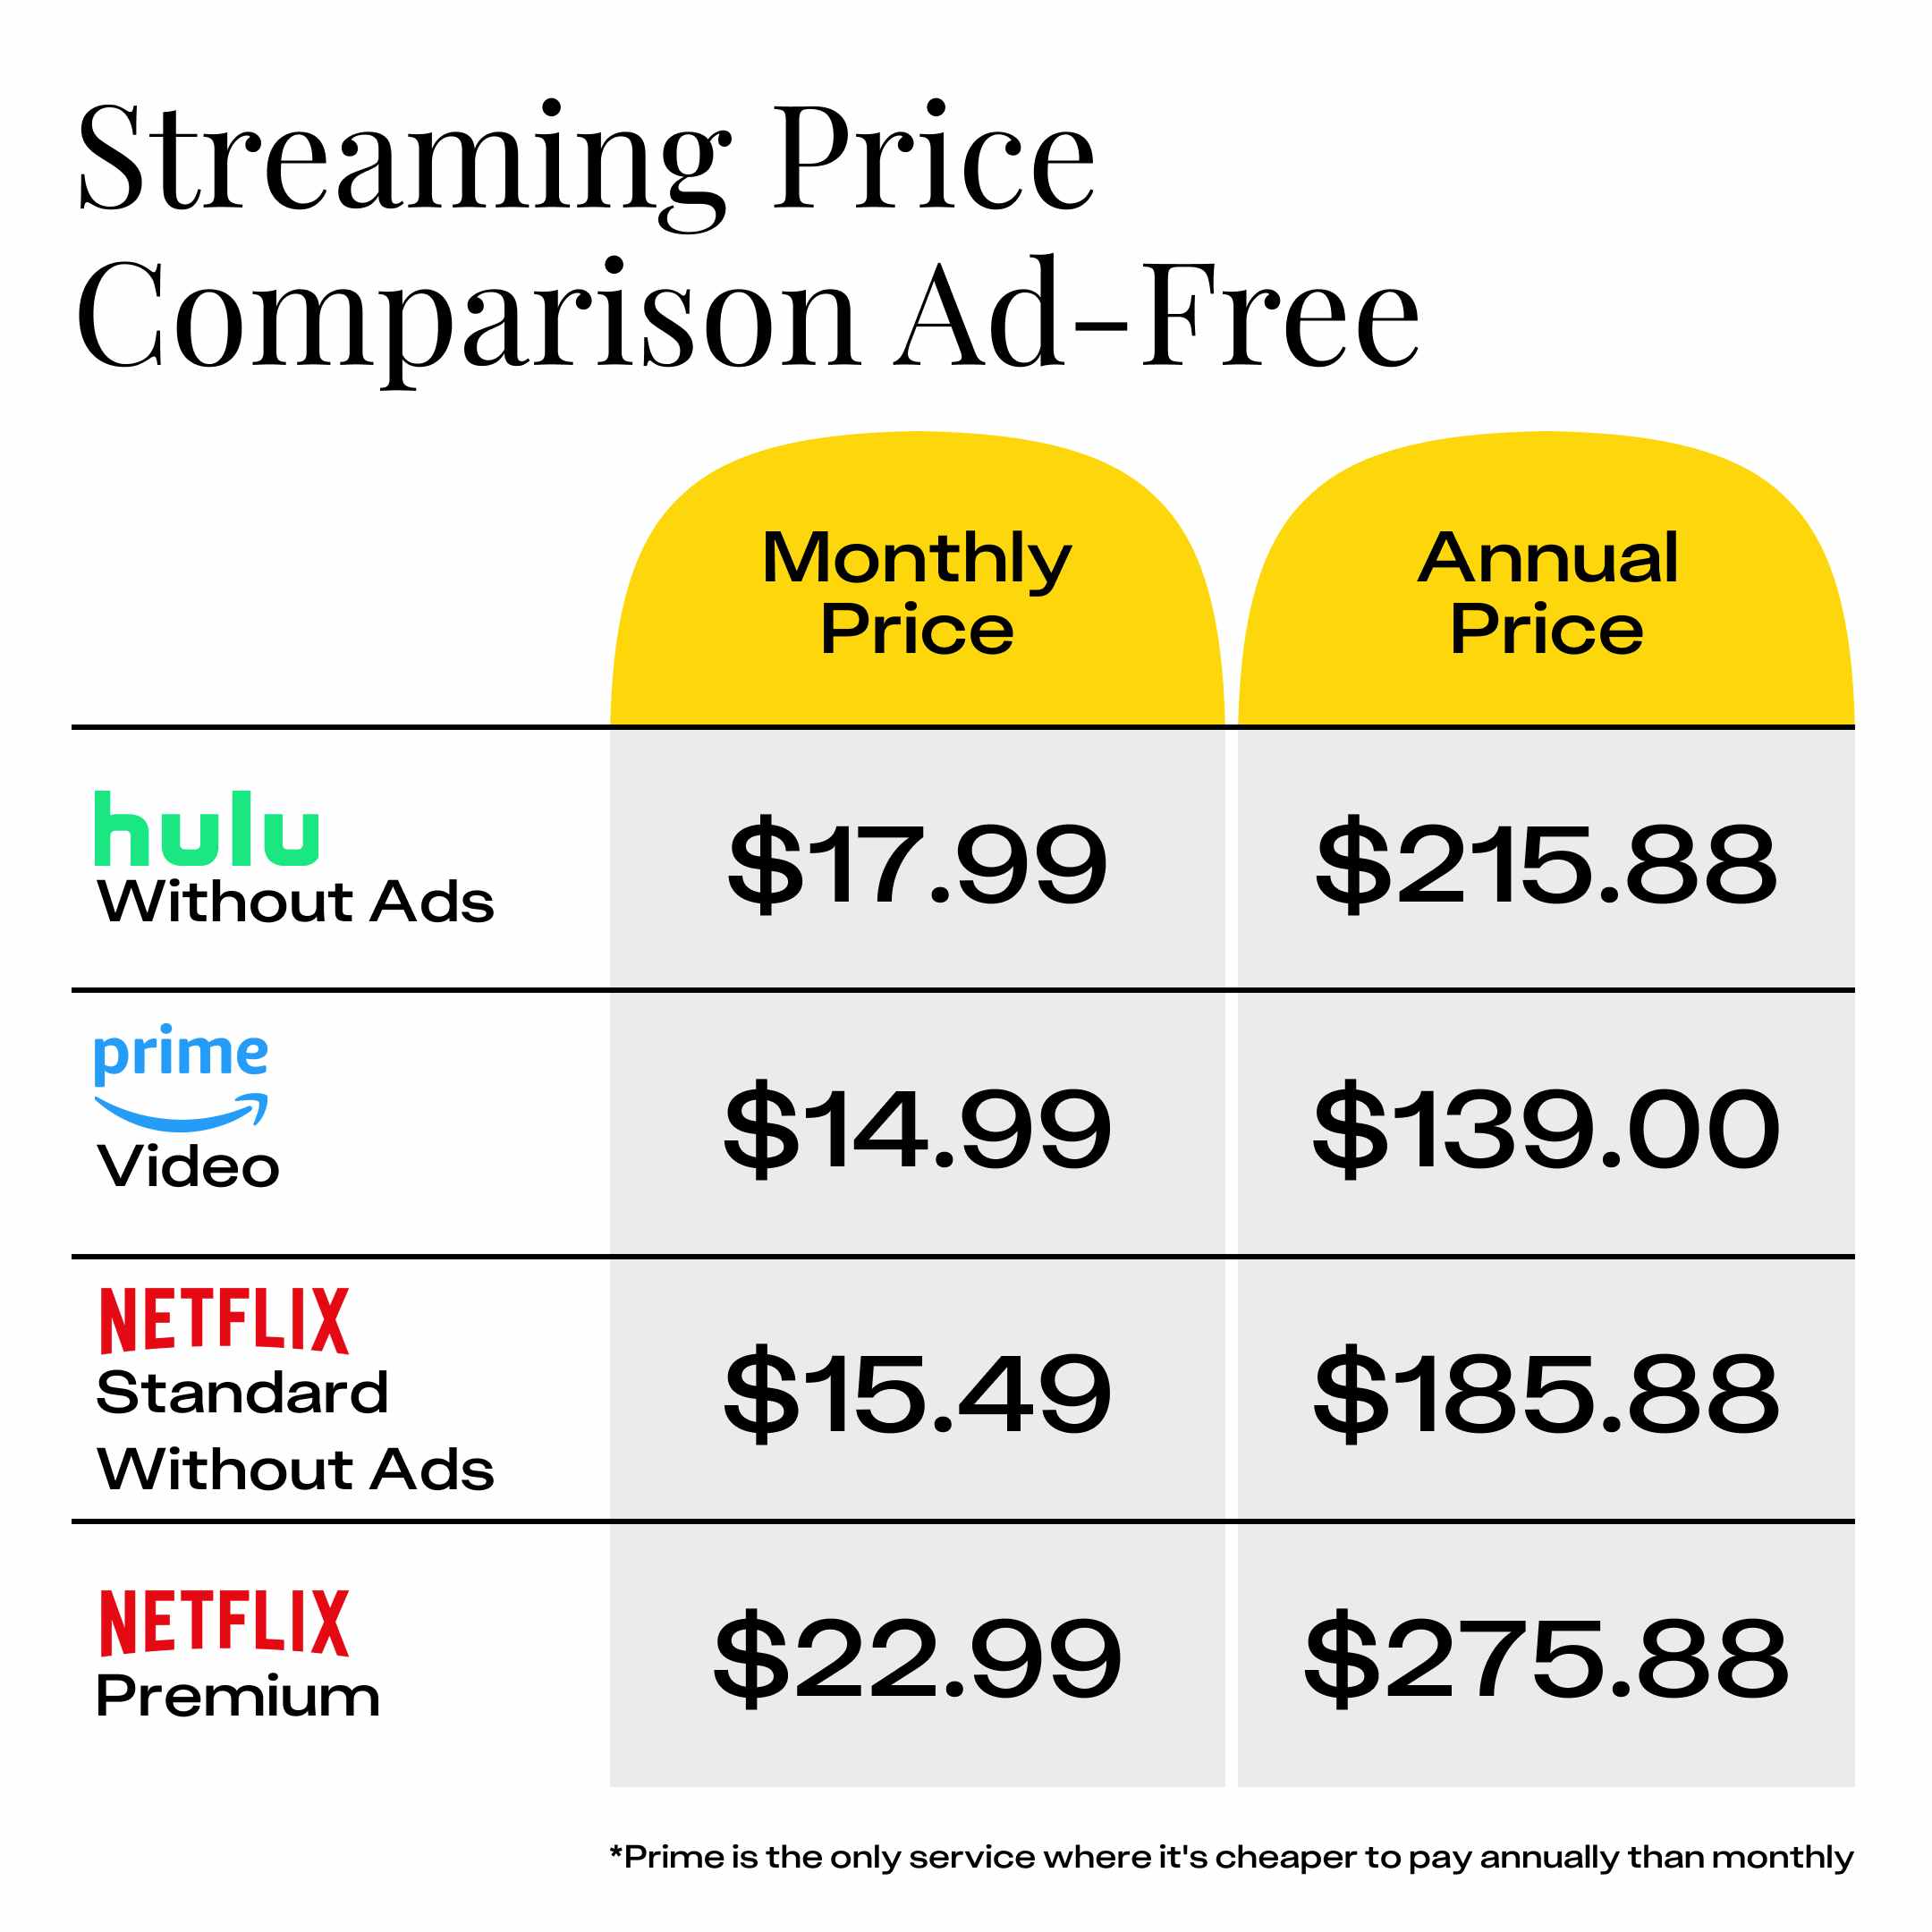 price comparison for streaming service plans without ads from hulu, amazon prime video, and netflix